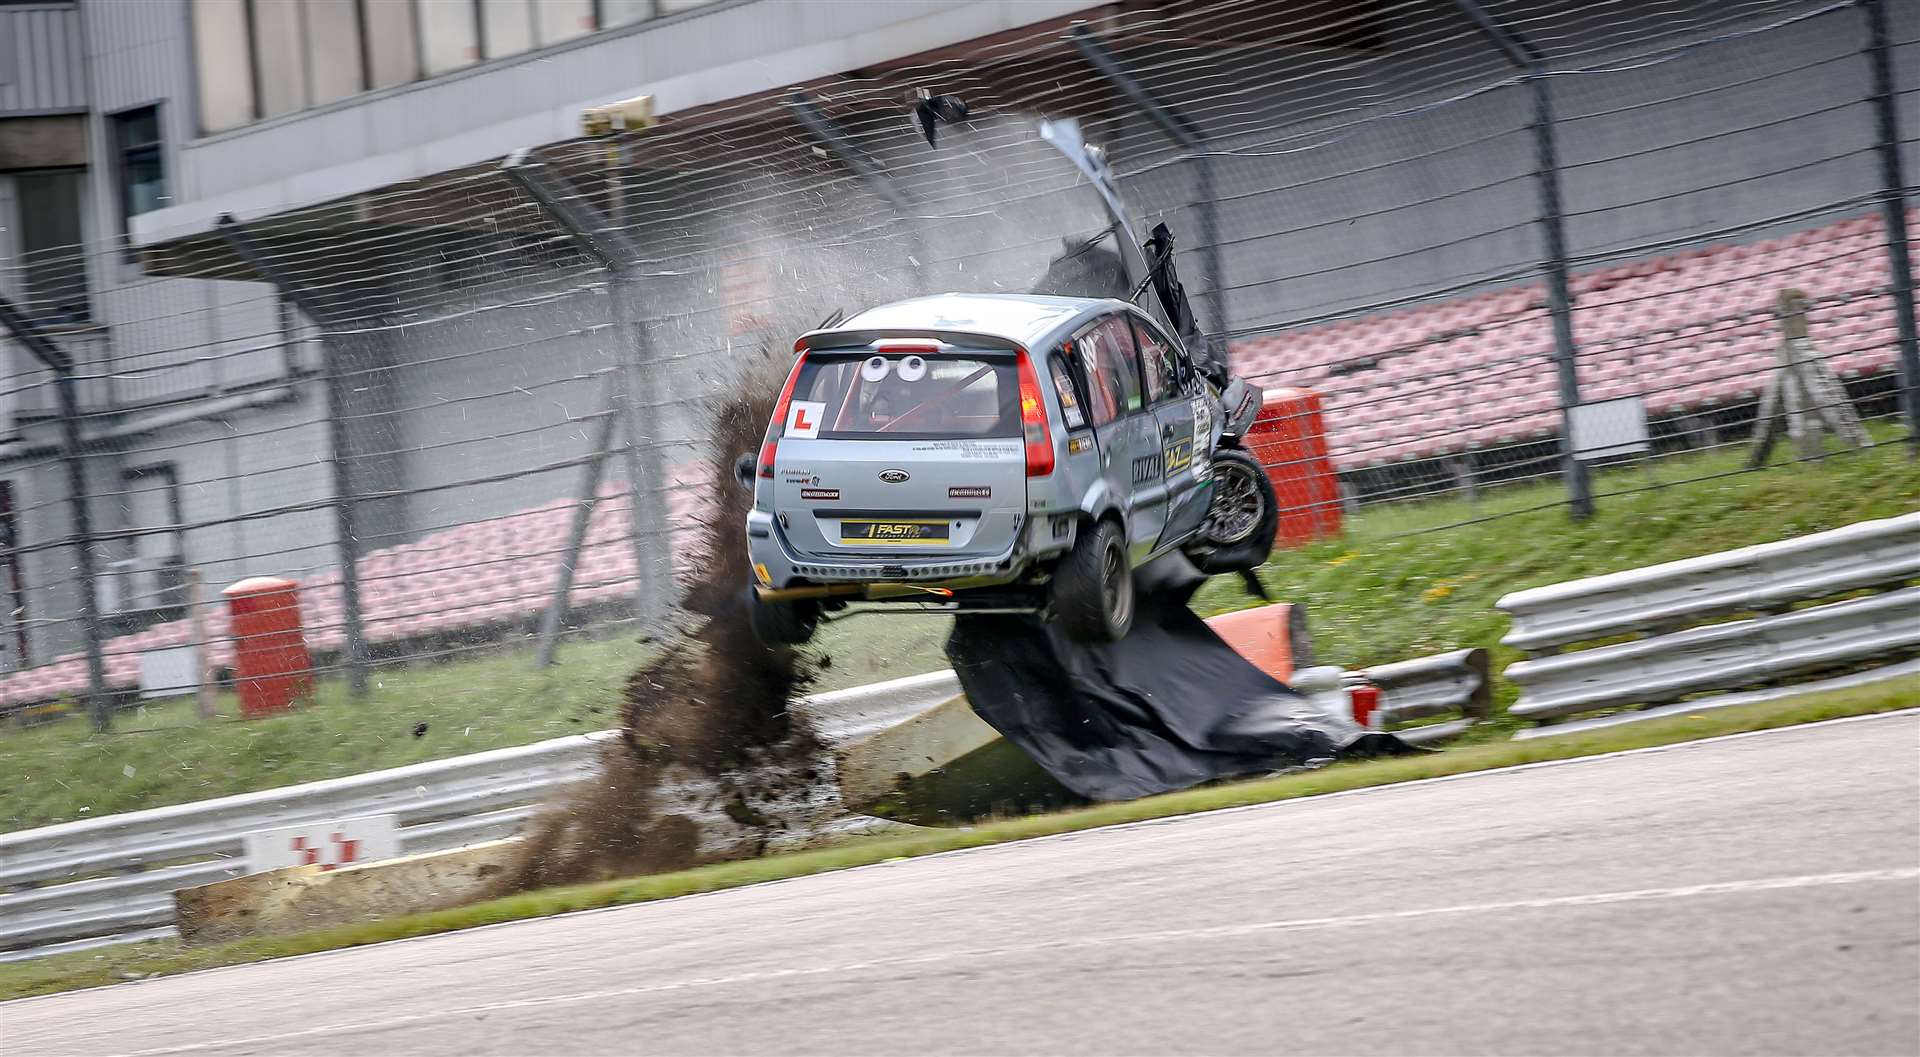 Rob Boston had a lucky escape after his car came off the track at Brands Hatch. Photo: Stephen Jackman/Eat My Pixels